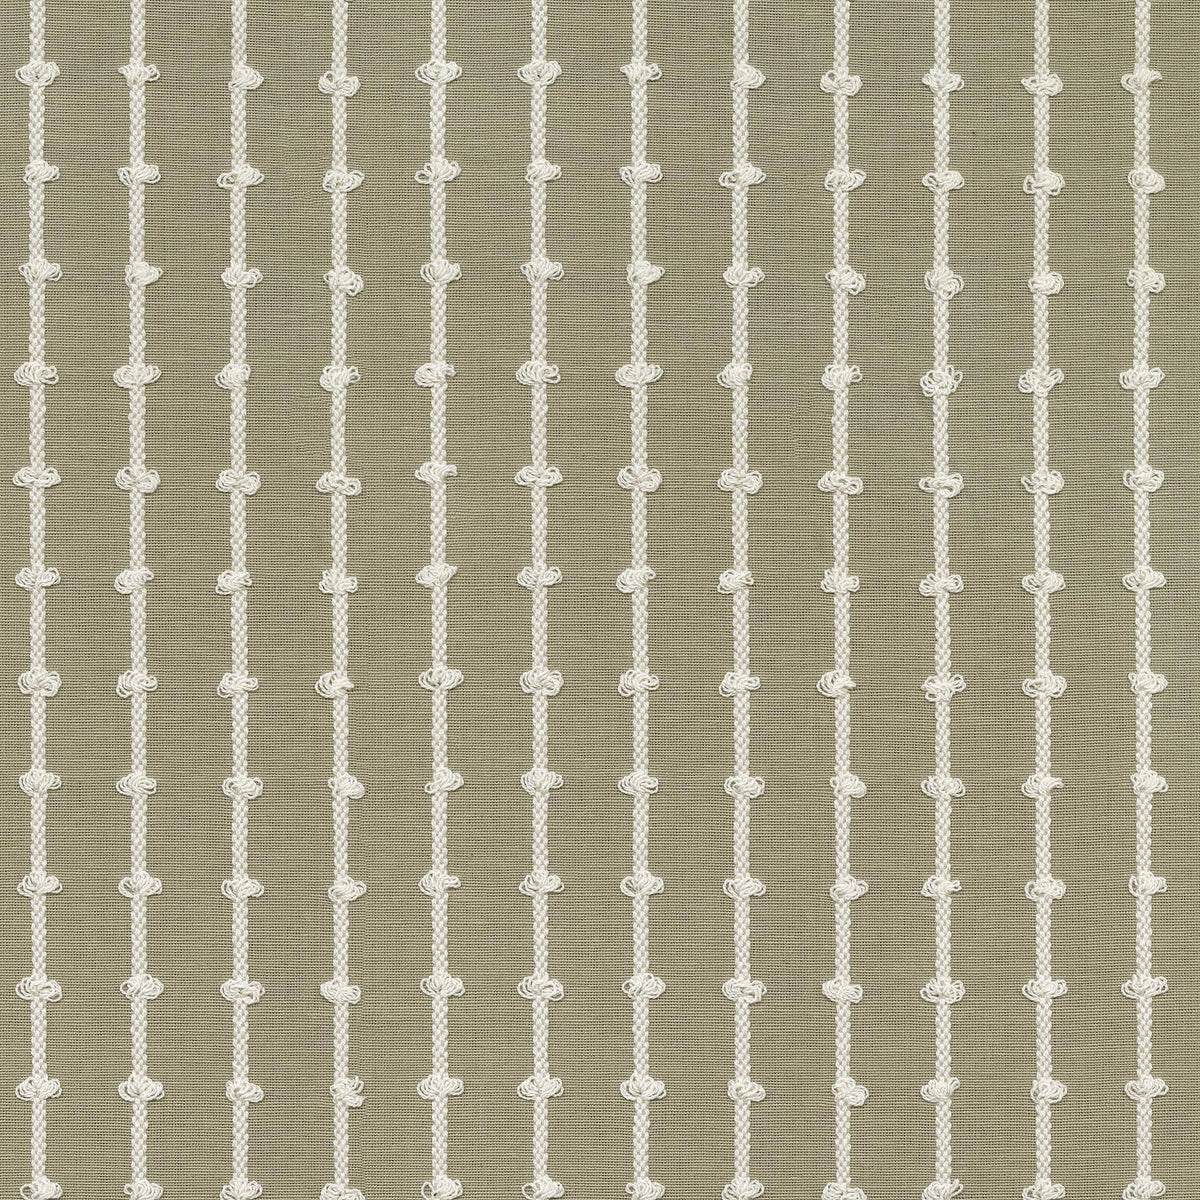 P/K Lifestyles Loops - Twine 410611 Upholstery Fabric